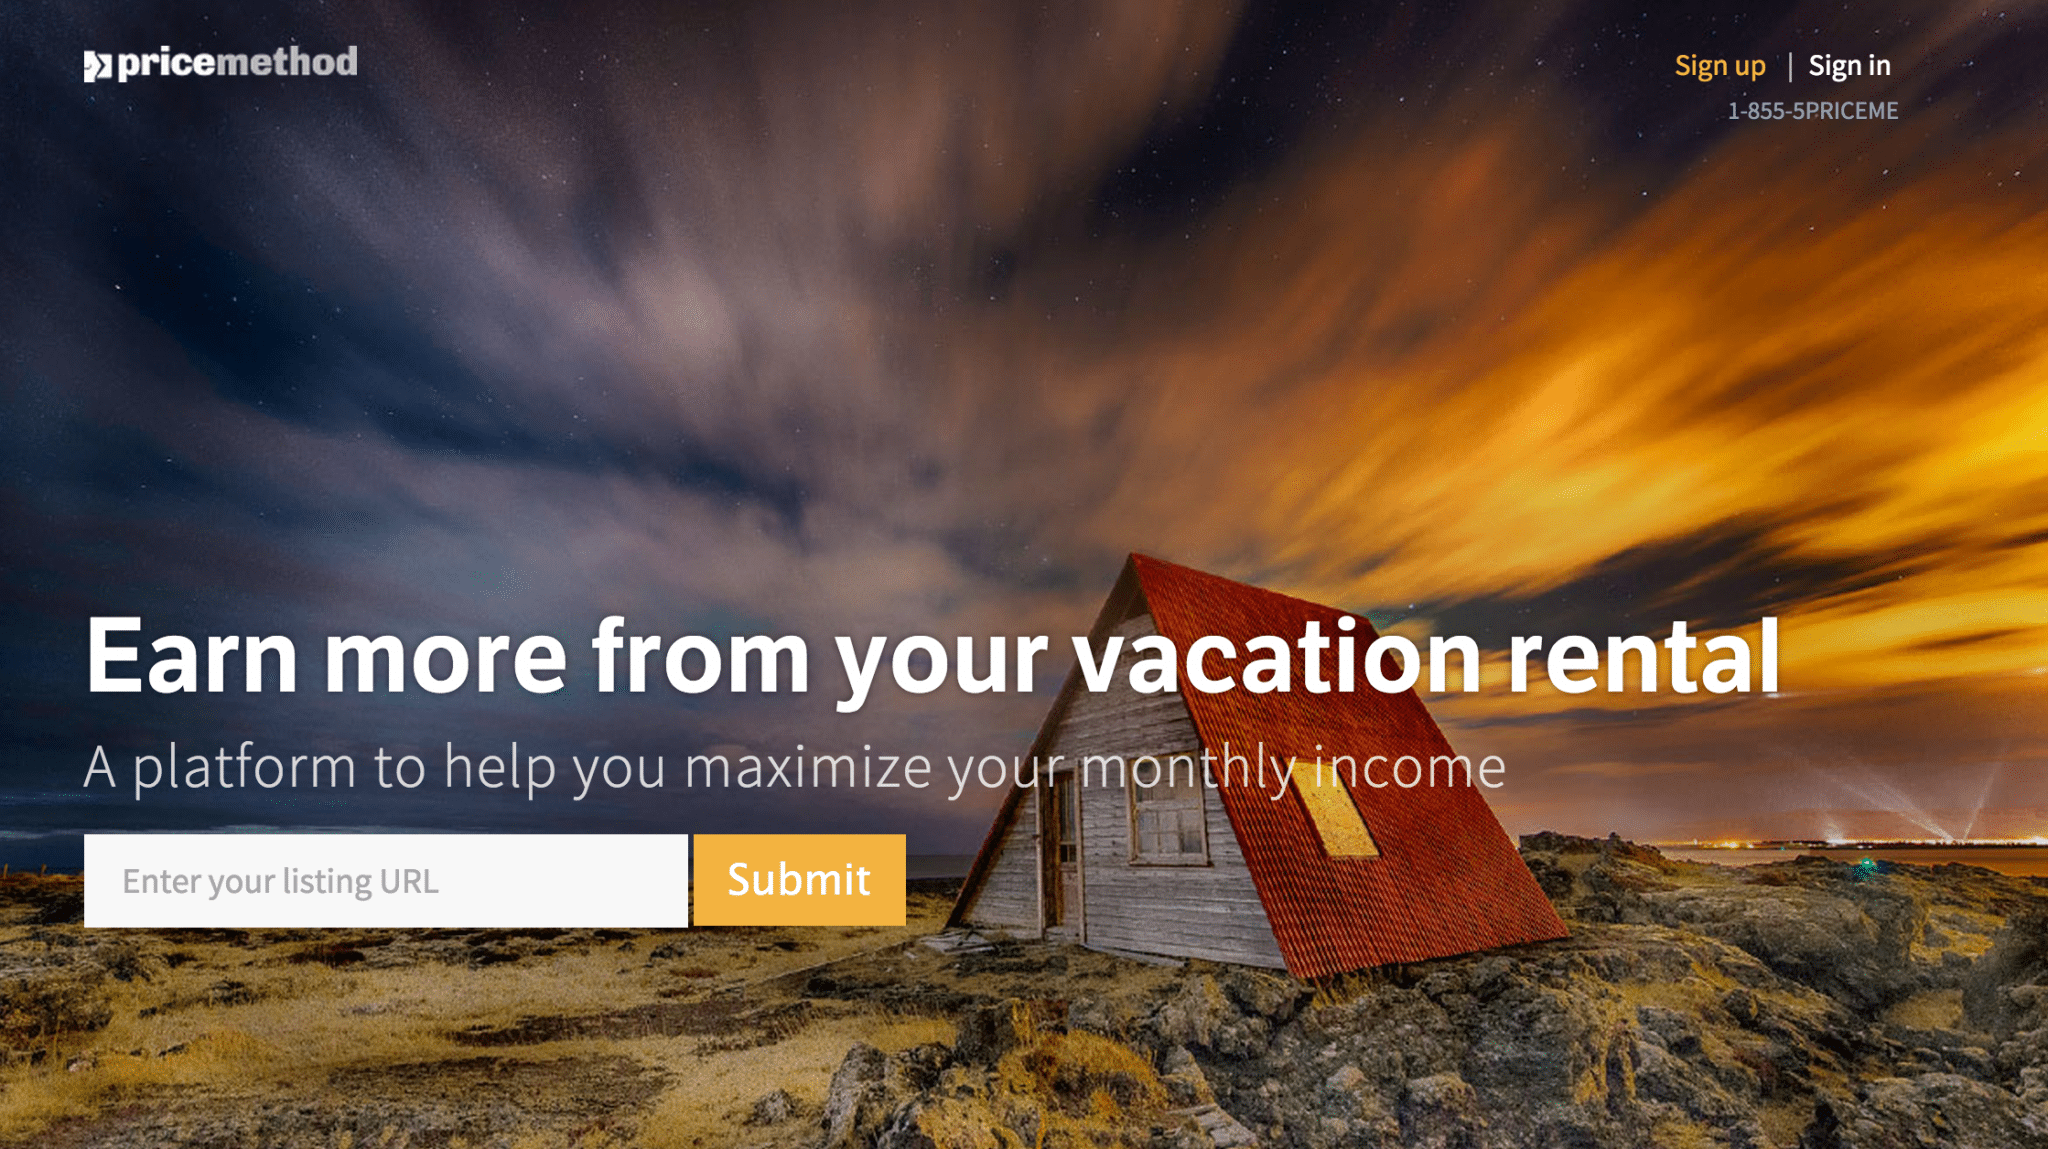 PriceMethod is a P2P platform for renting and managing your vacation rental.